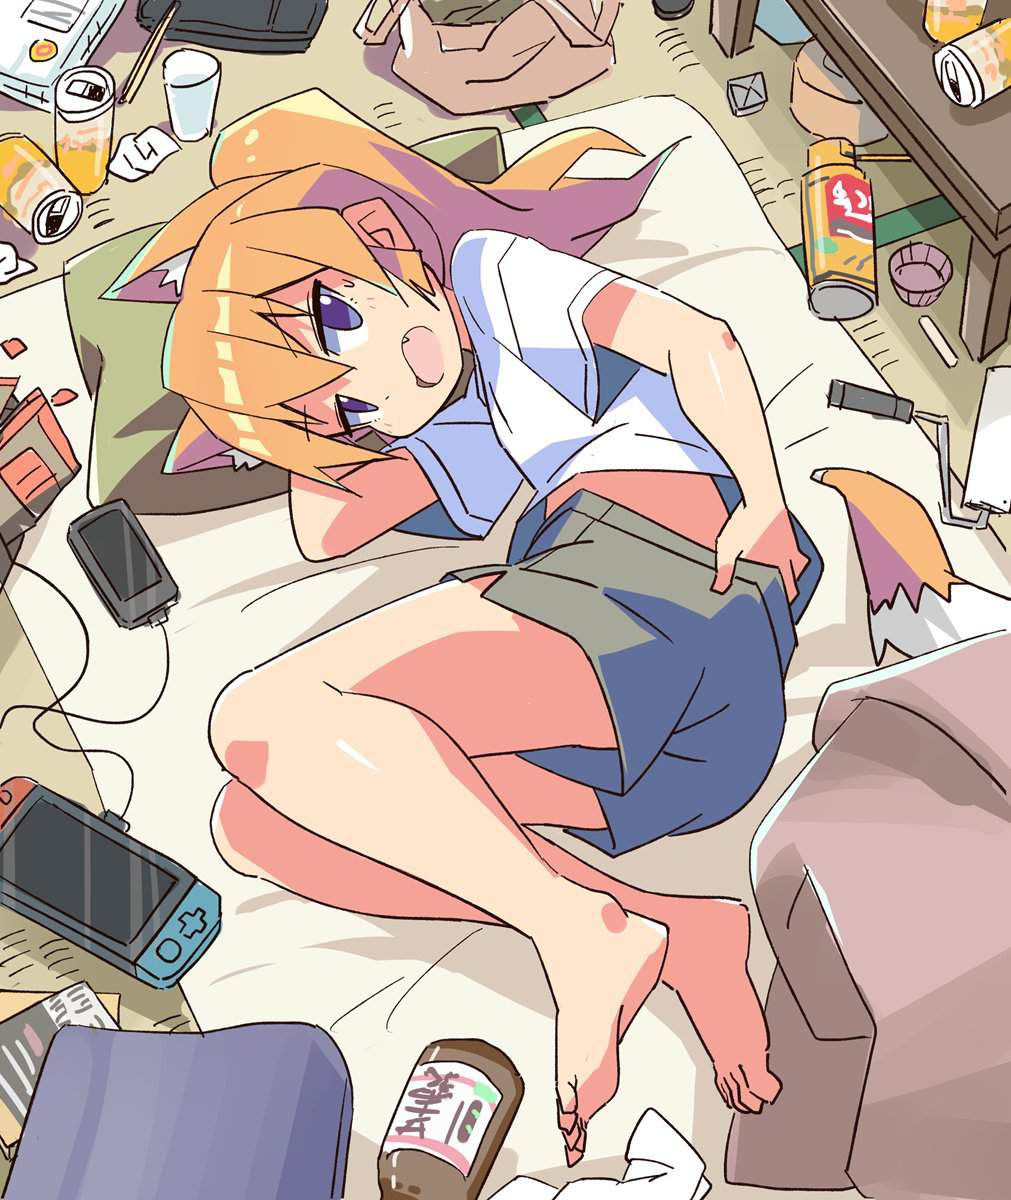 [G out] secondary erotic image of girls living in a dirty room 33